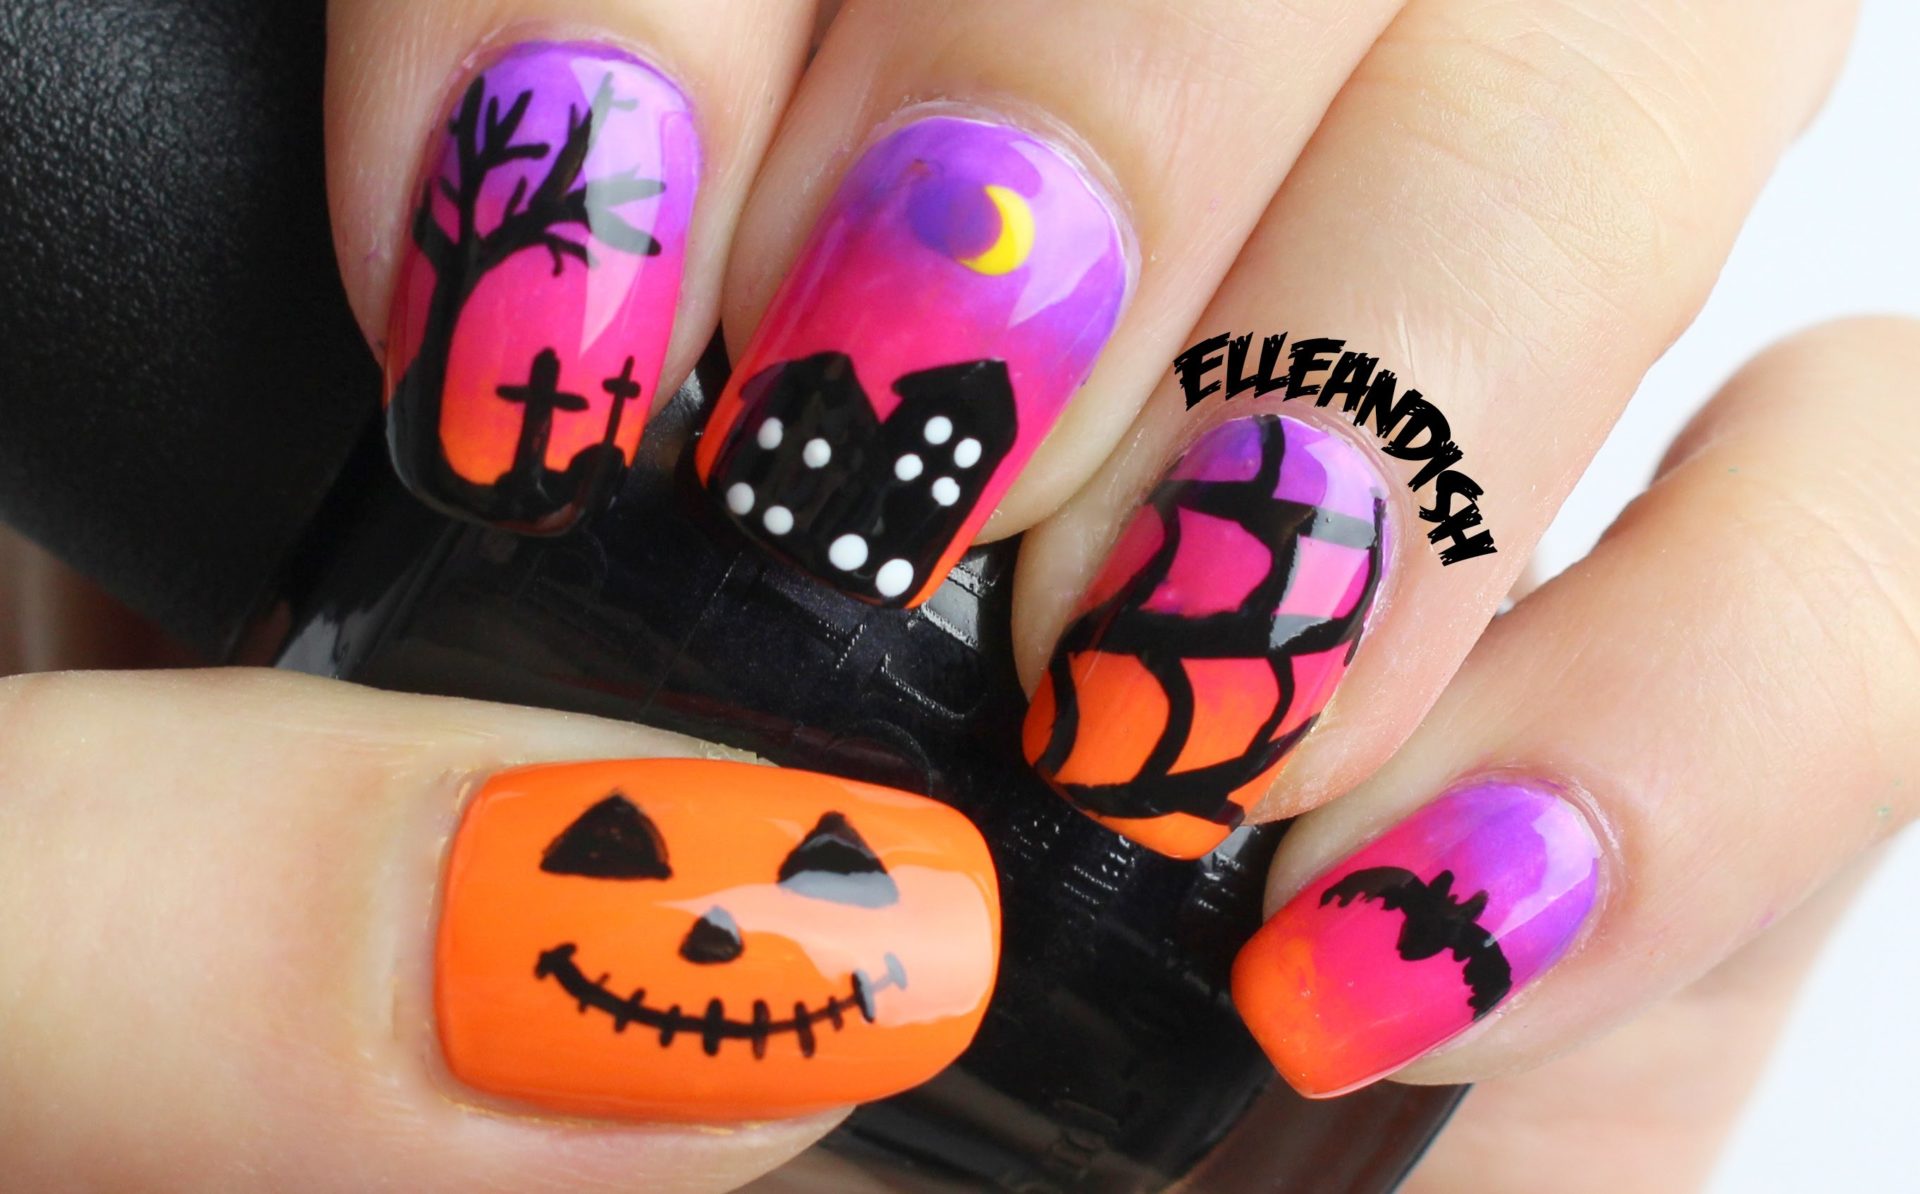 6. Halloween Nail Art with Rhinestone Accents - wide 2